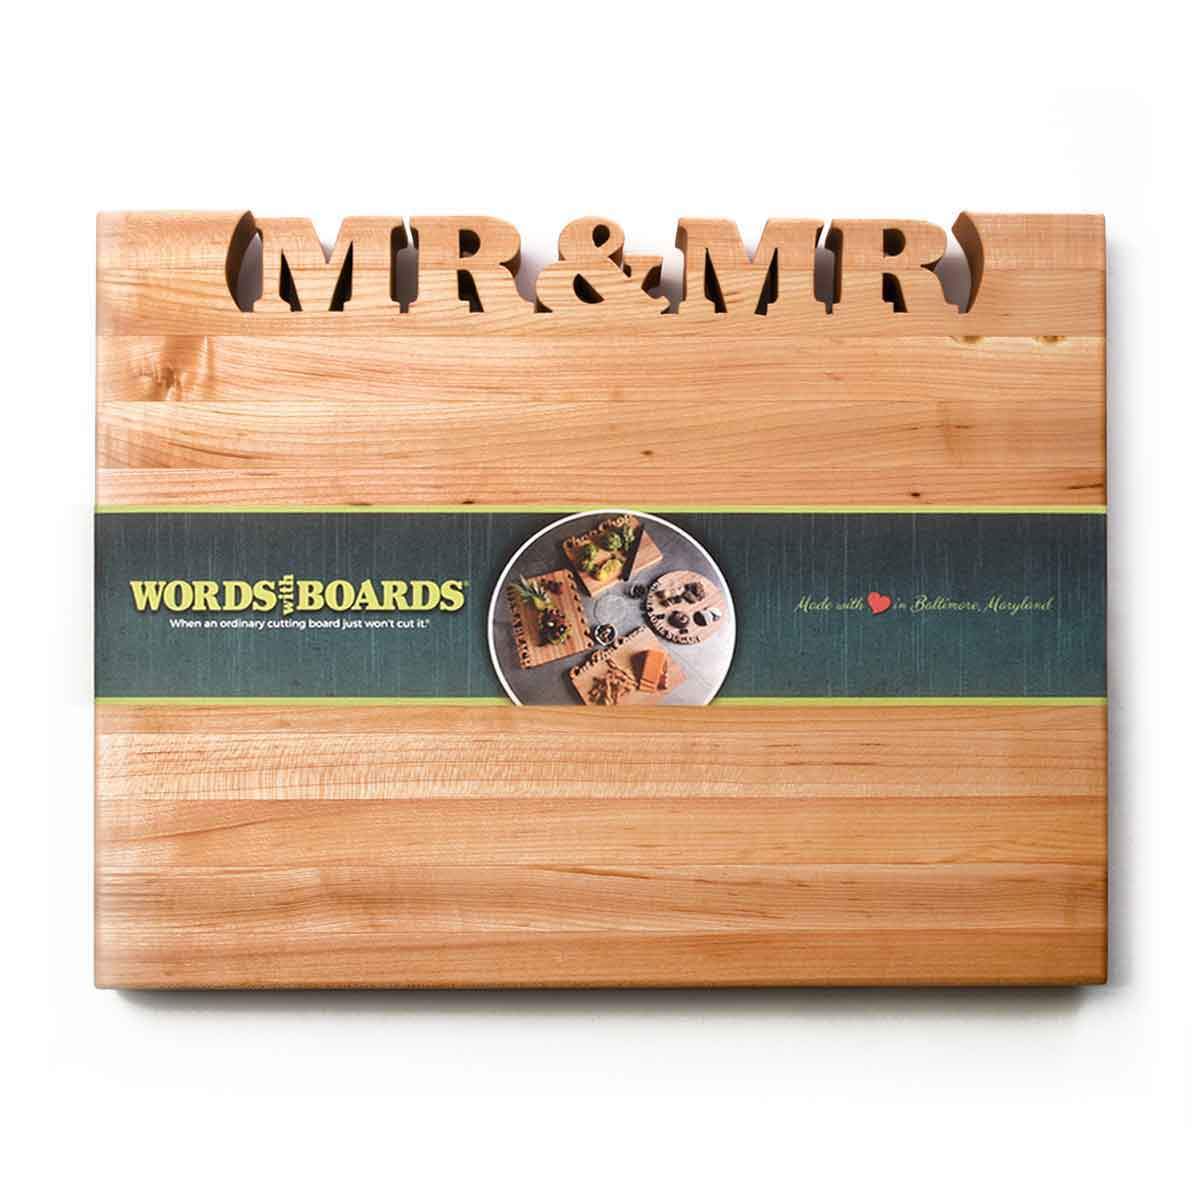 Unique Wedding Gifts: Wedding ideas for same sex partners - Words with Boards - 2